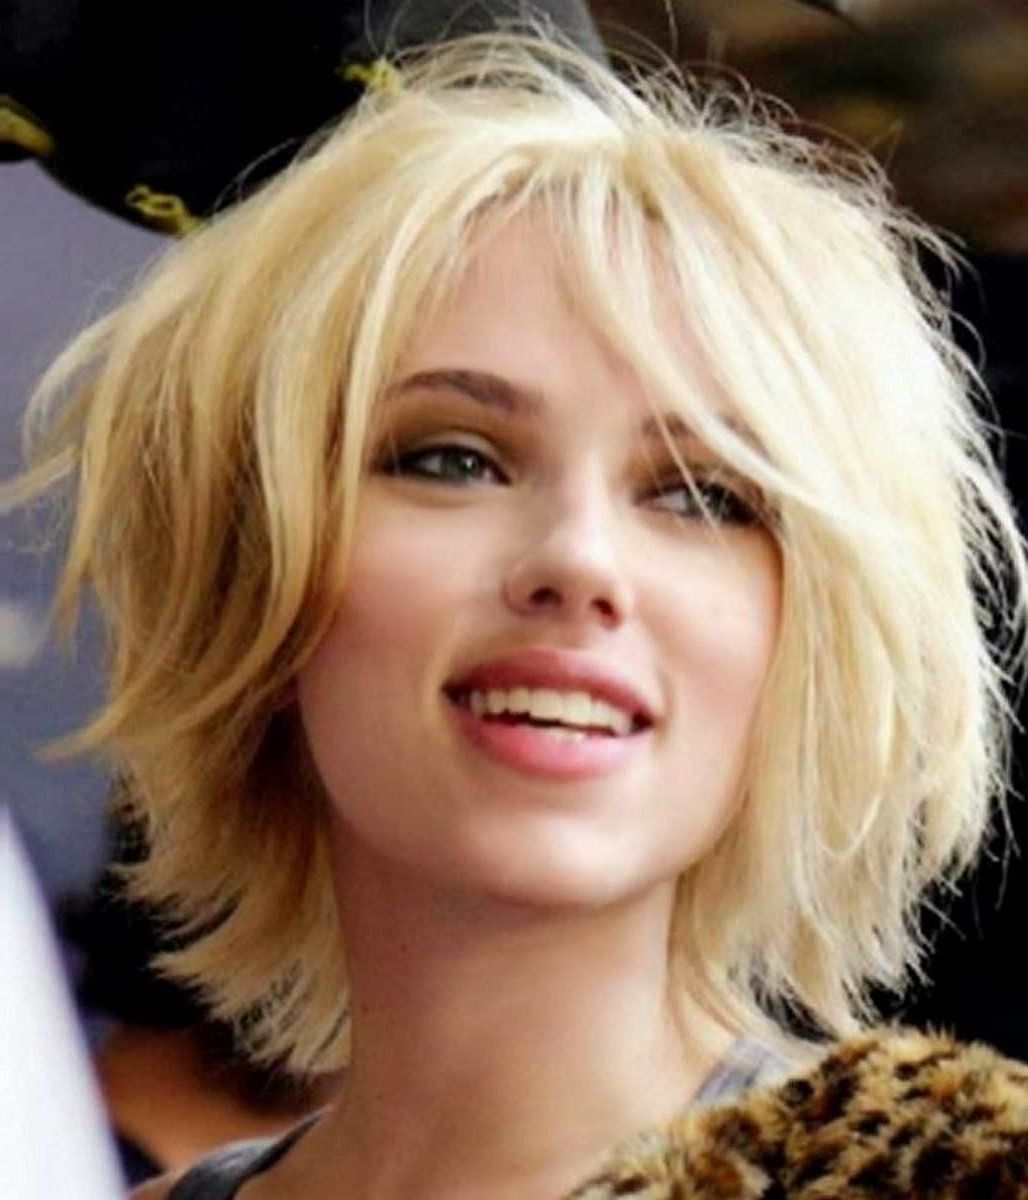 Widely Used Shaggy Blonde Hairstyles Intended For Short Shaggy Hairstyles For Thick Hair: Popular Short Shaggy (View 2 of 15)